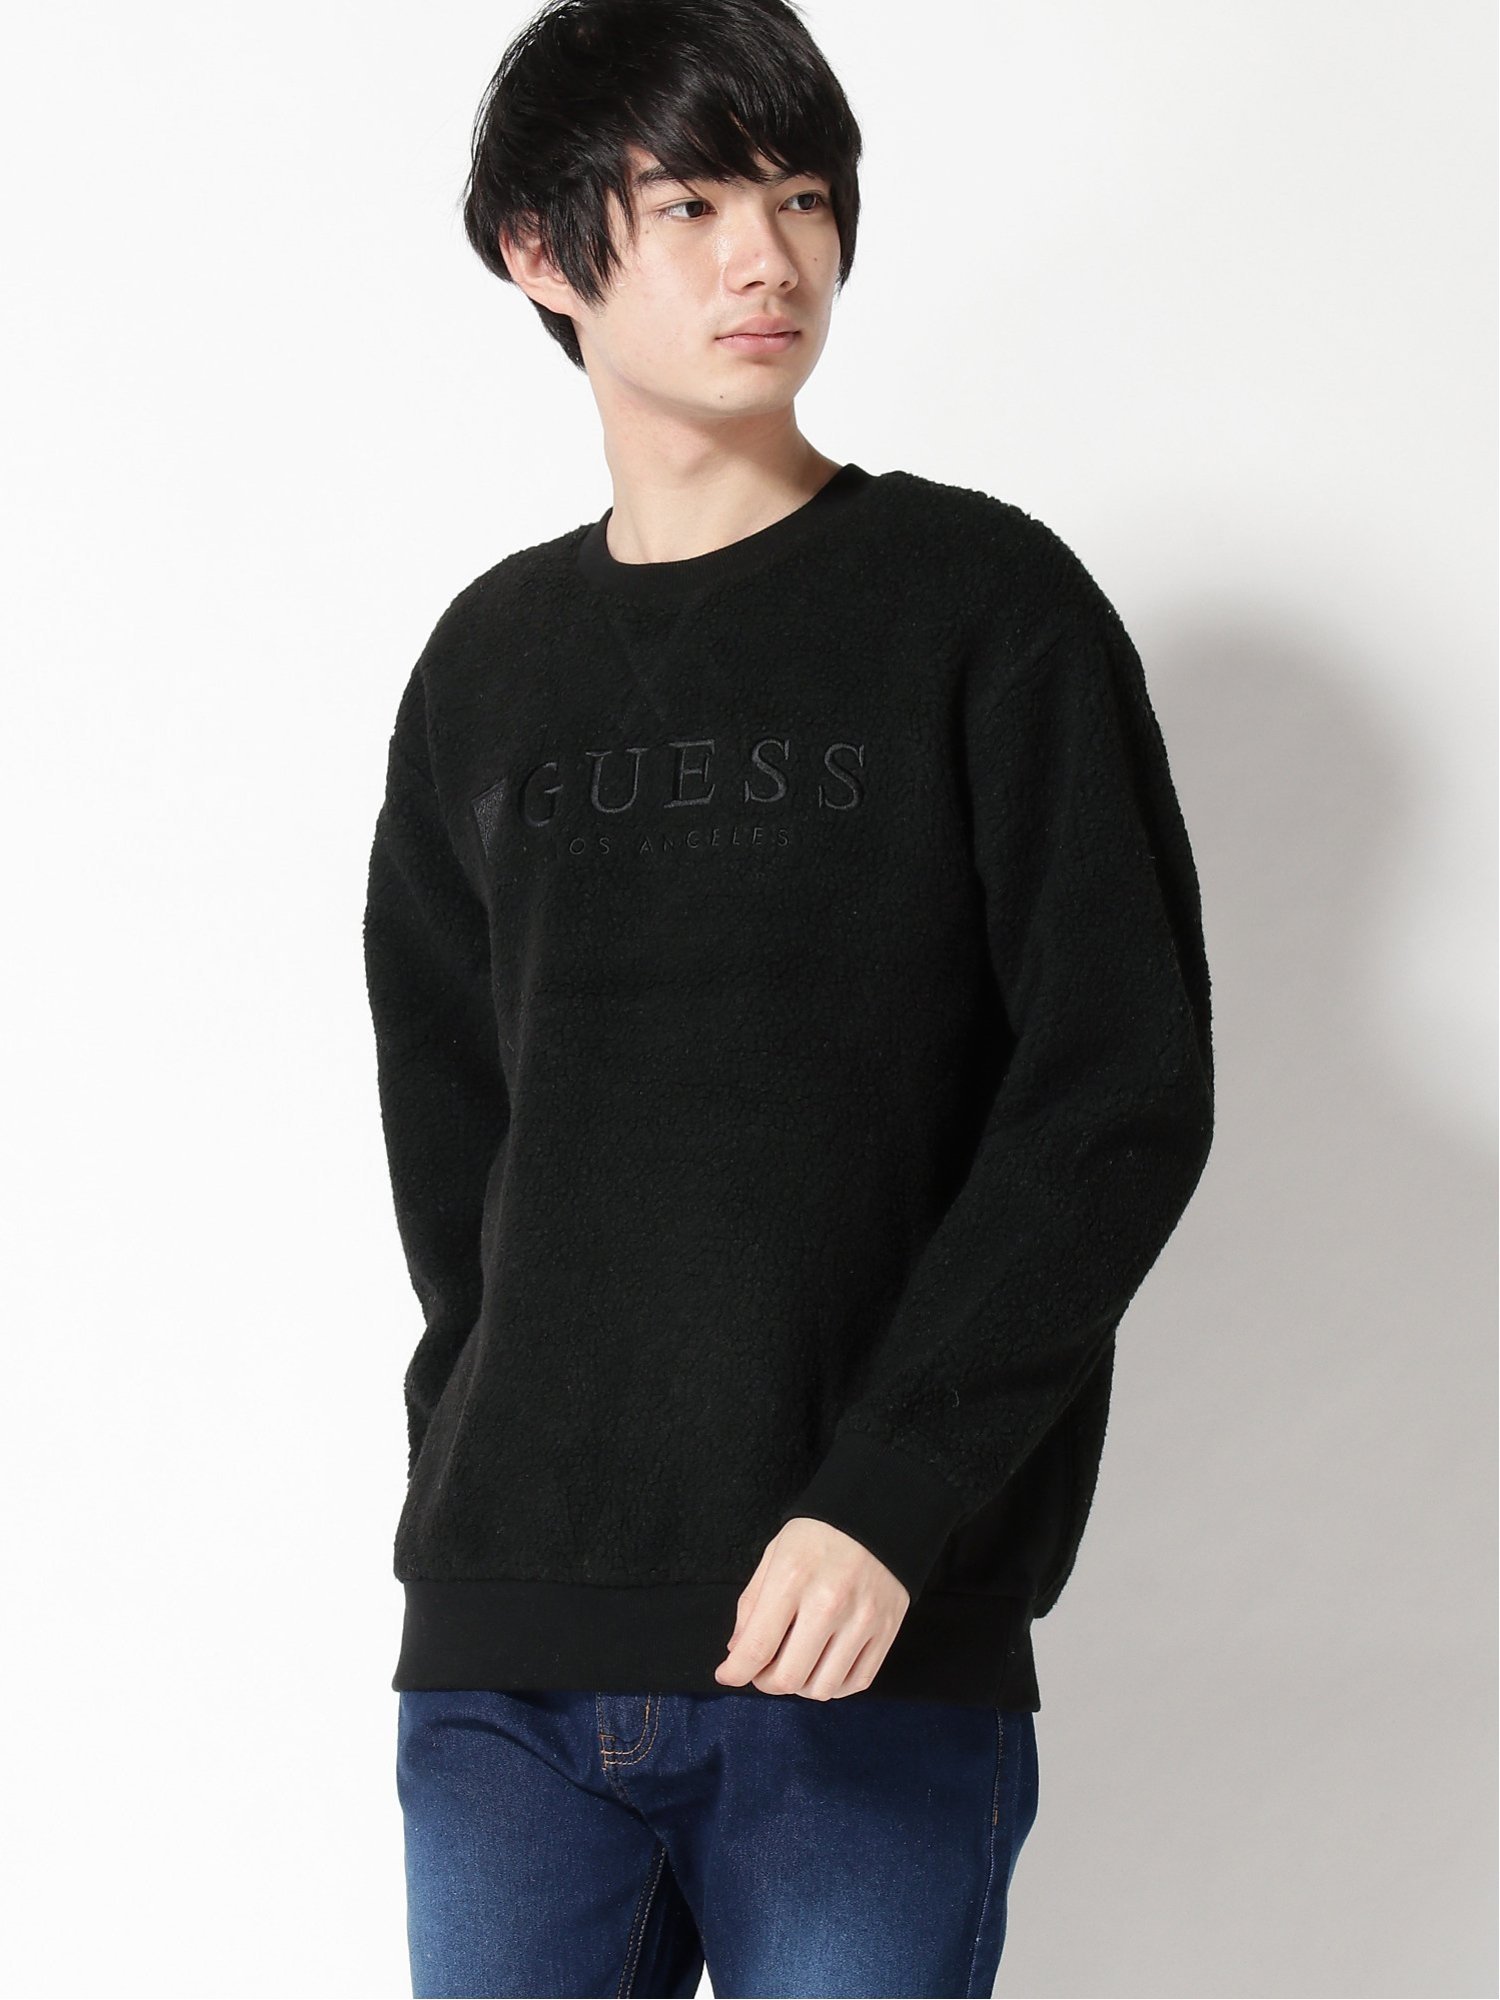 【SALE／30%OFF】GUESS (M)EMBROIDERY LOGO BOA SWEAT ゲス カットソー スウェット ホワイト ブラック【送料無料】